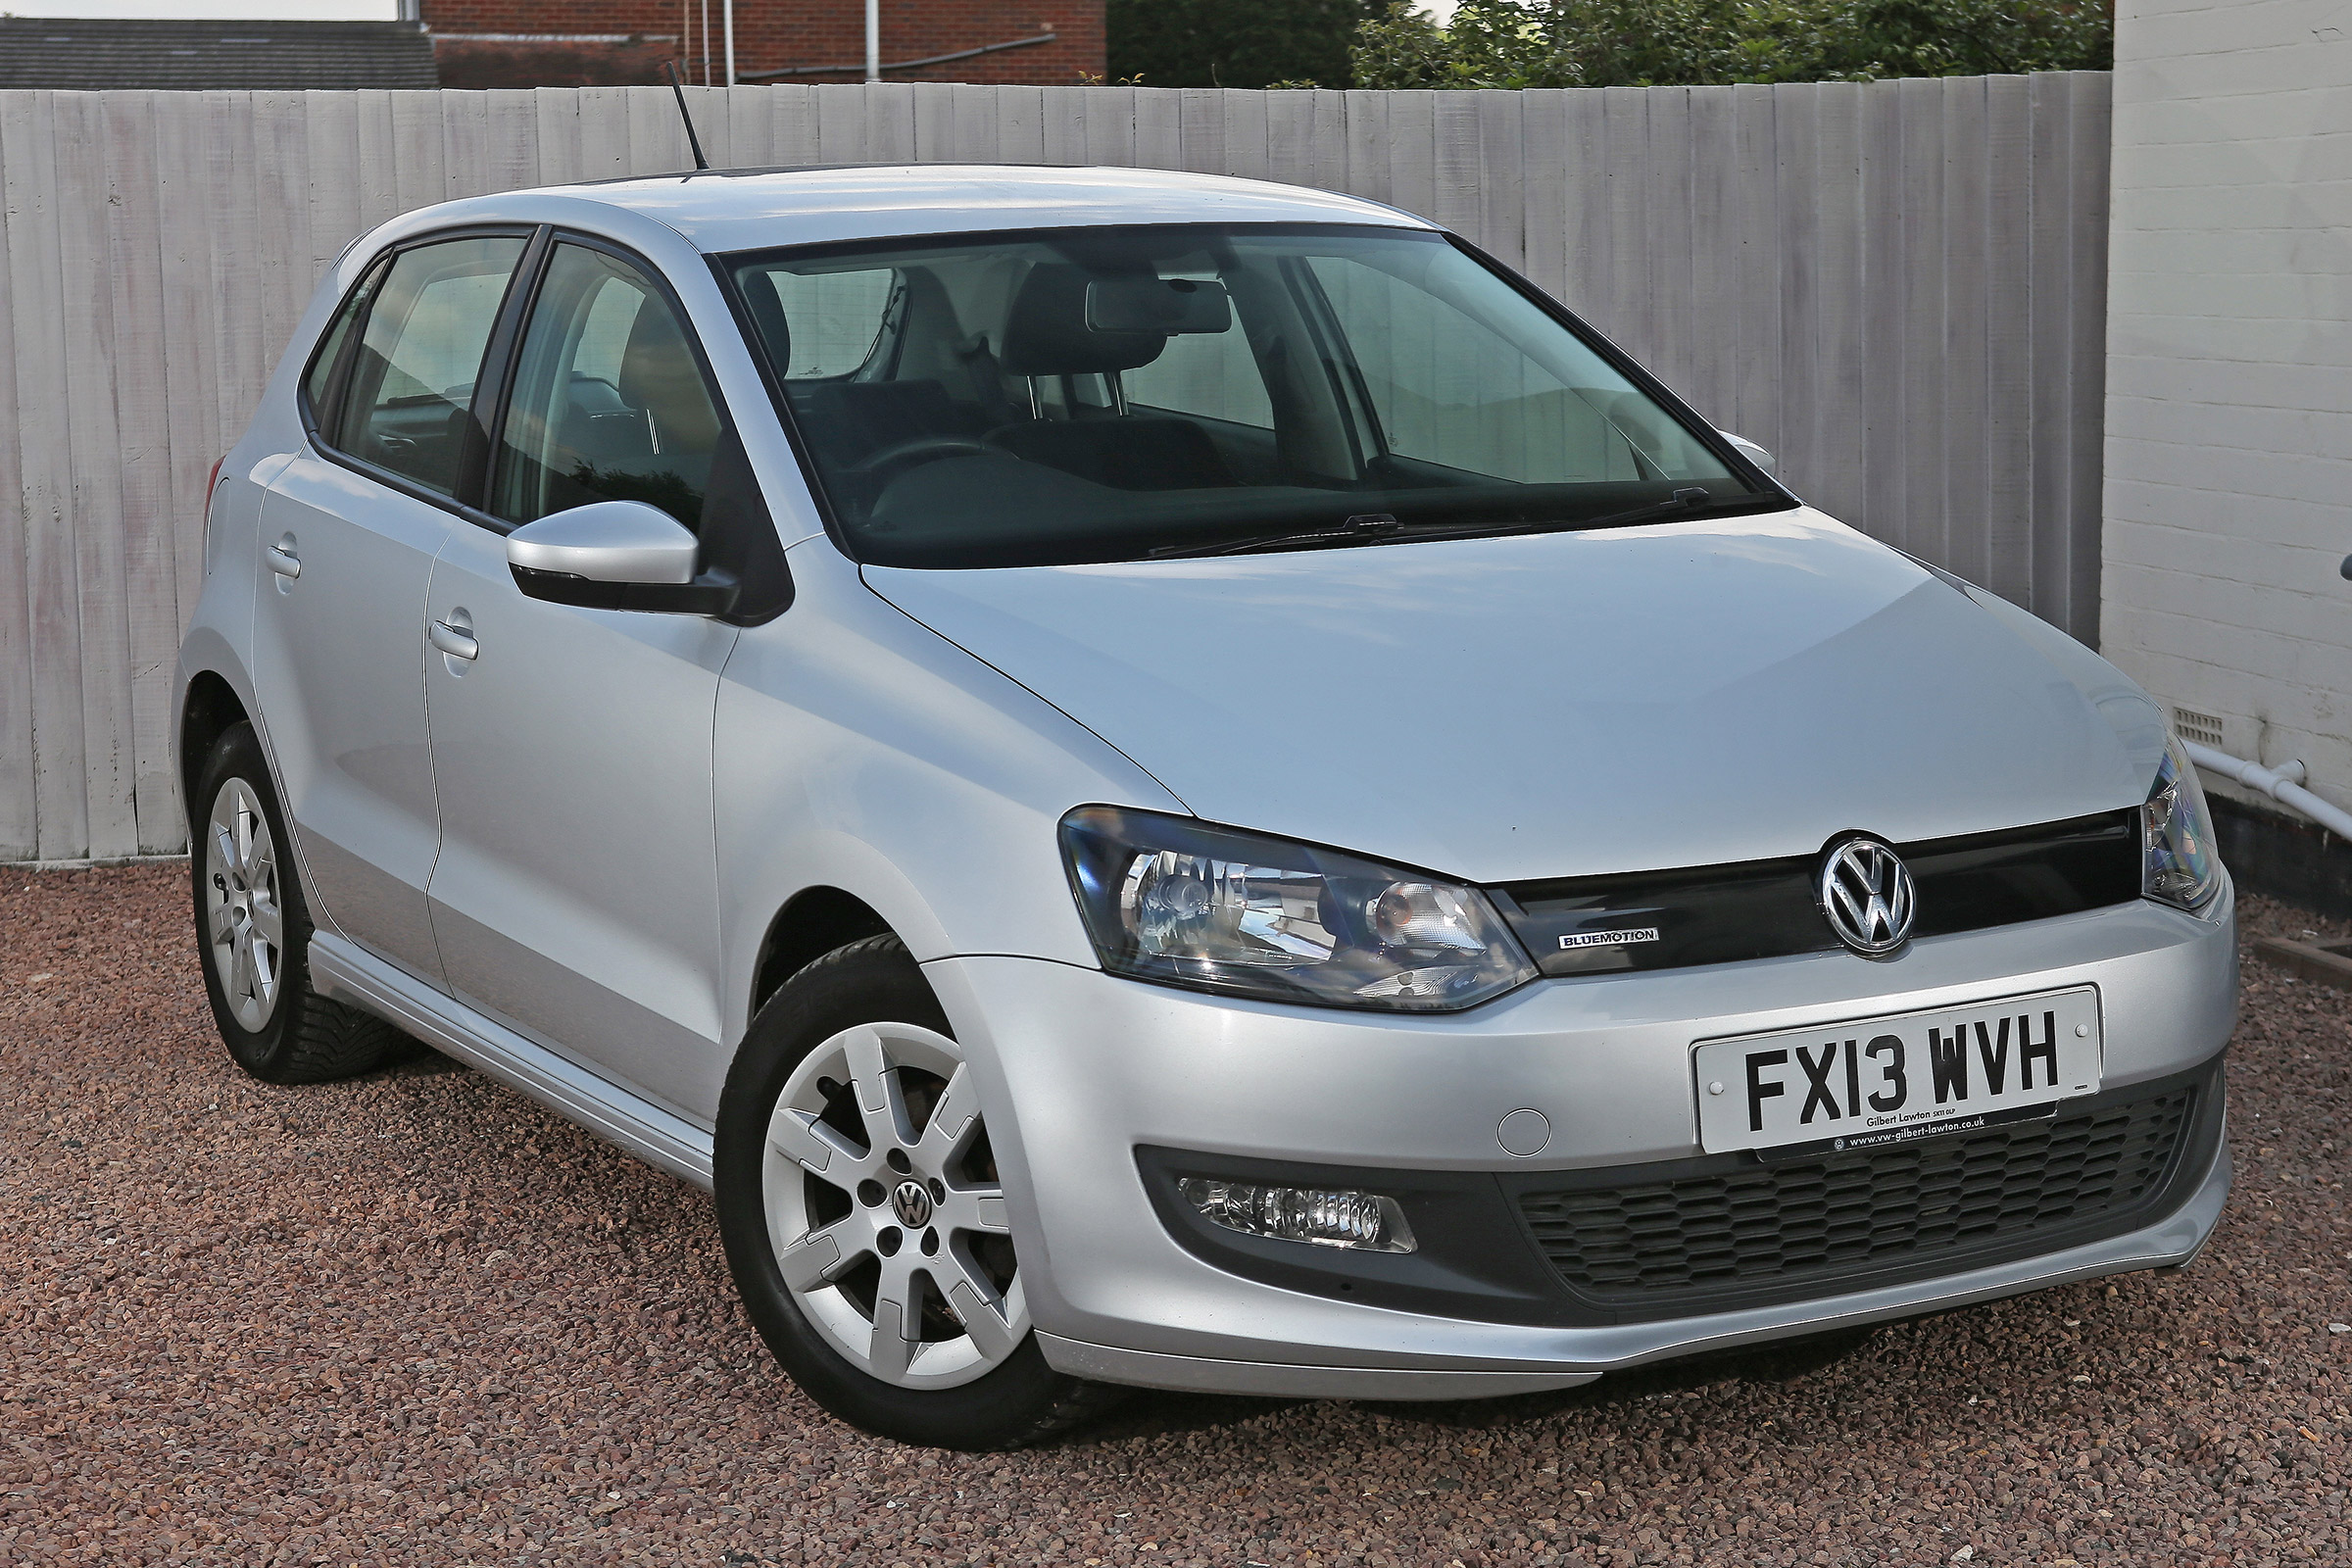 Used Volkswagen Polo buyer's guide | Auto Express